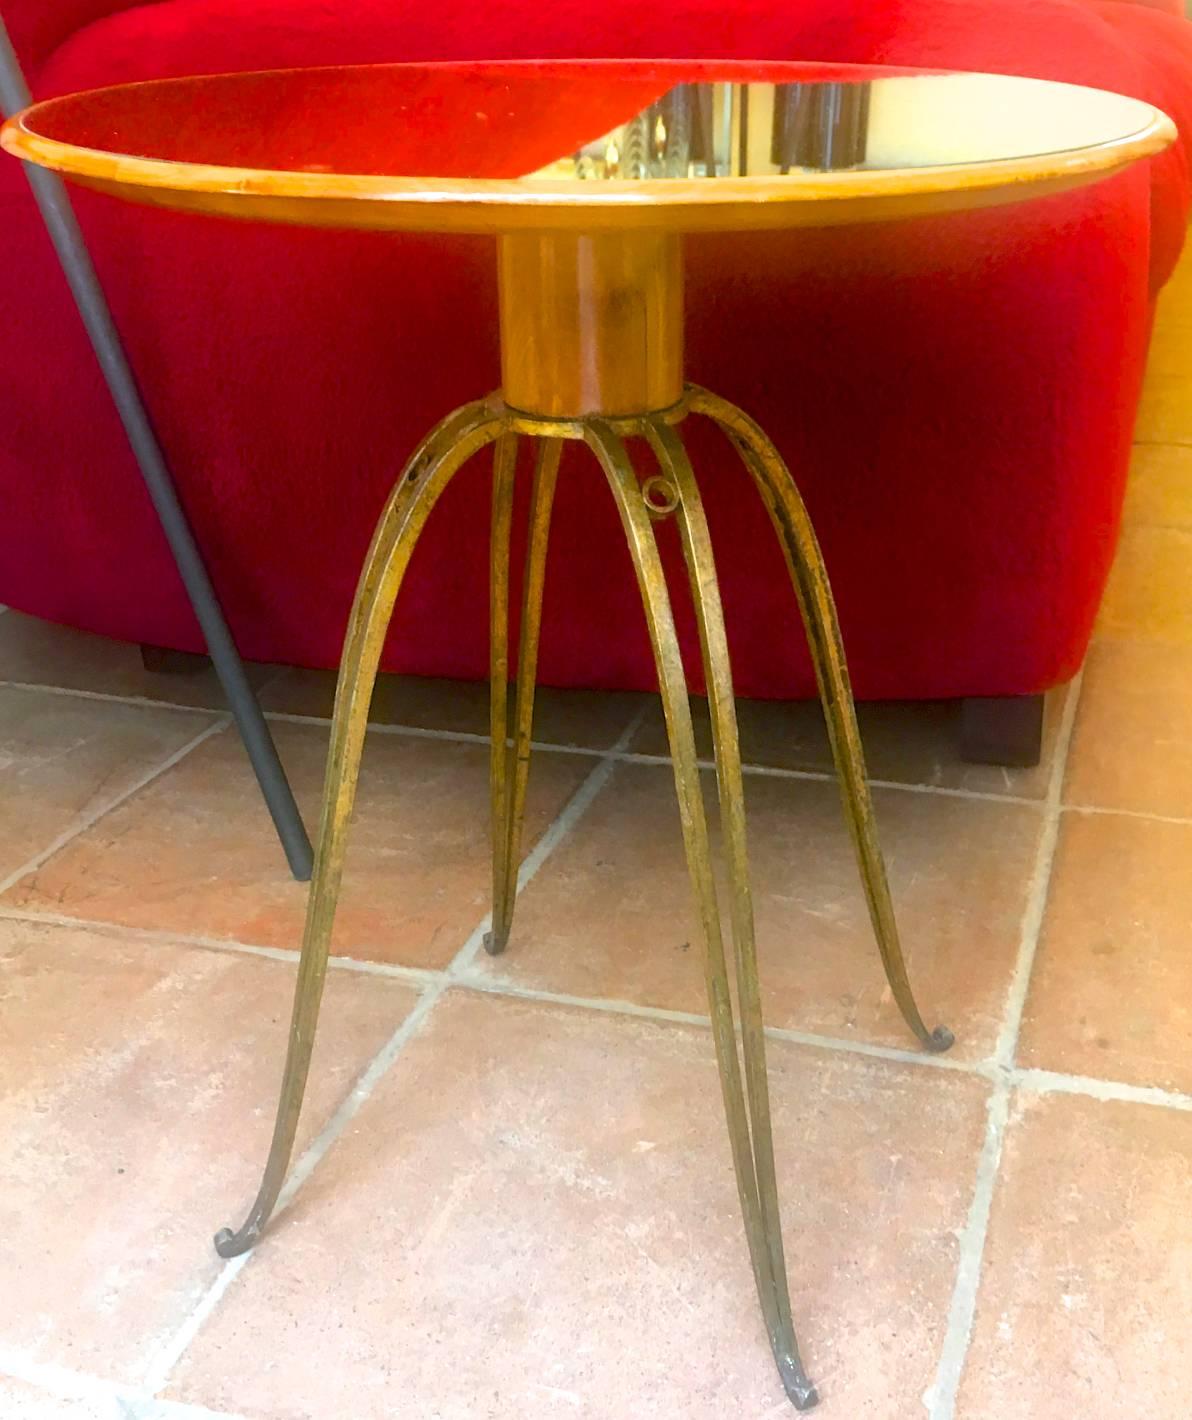 Rene Prou rare refined pair of side table in sycamore and gold leaf wrought iron
with mirror top.